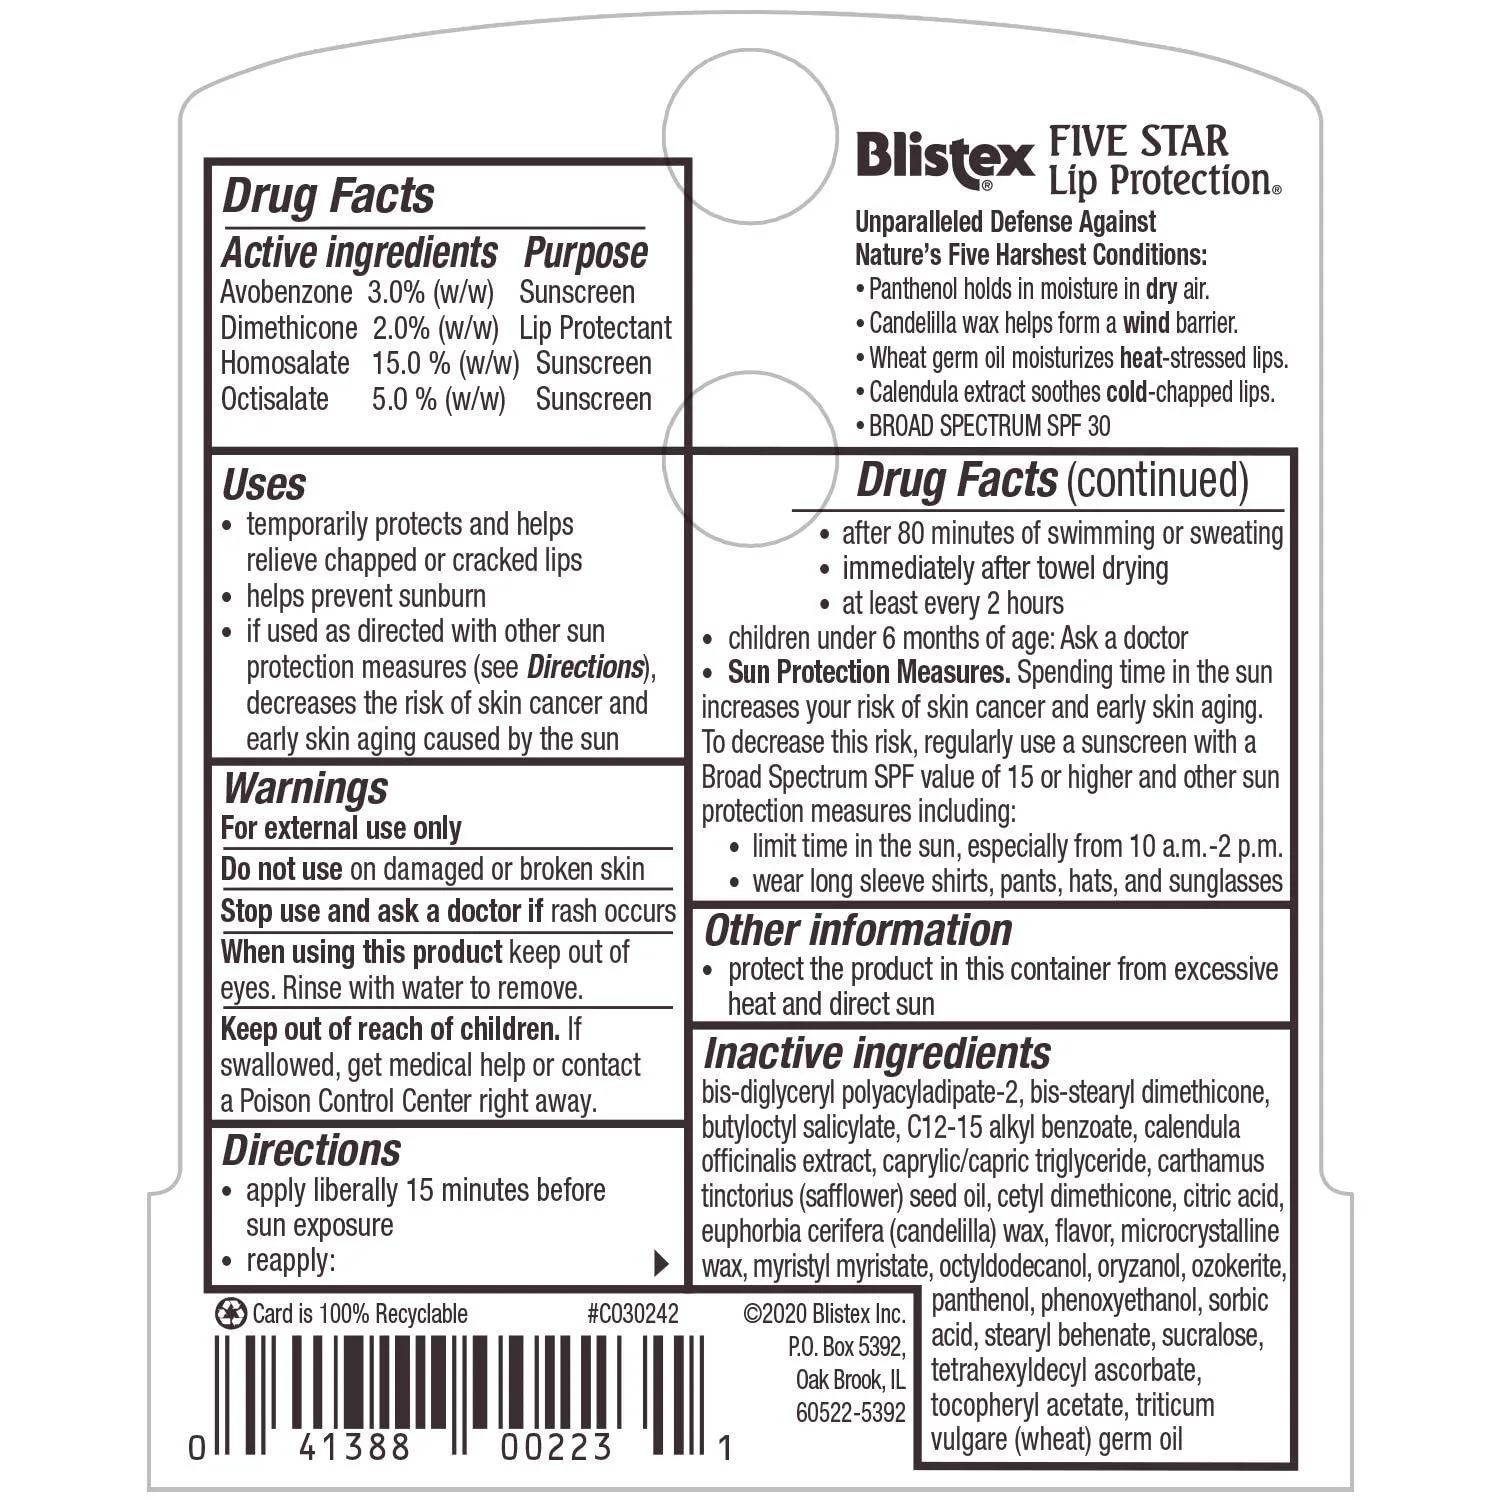 Blistex Five Star Lip Protection ingredients